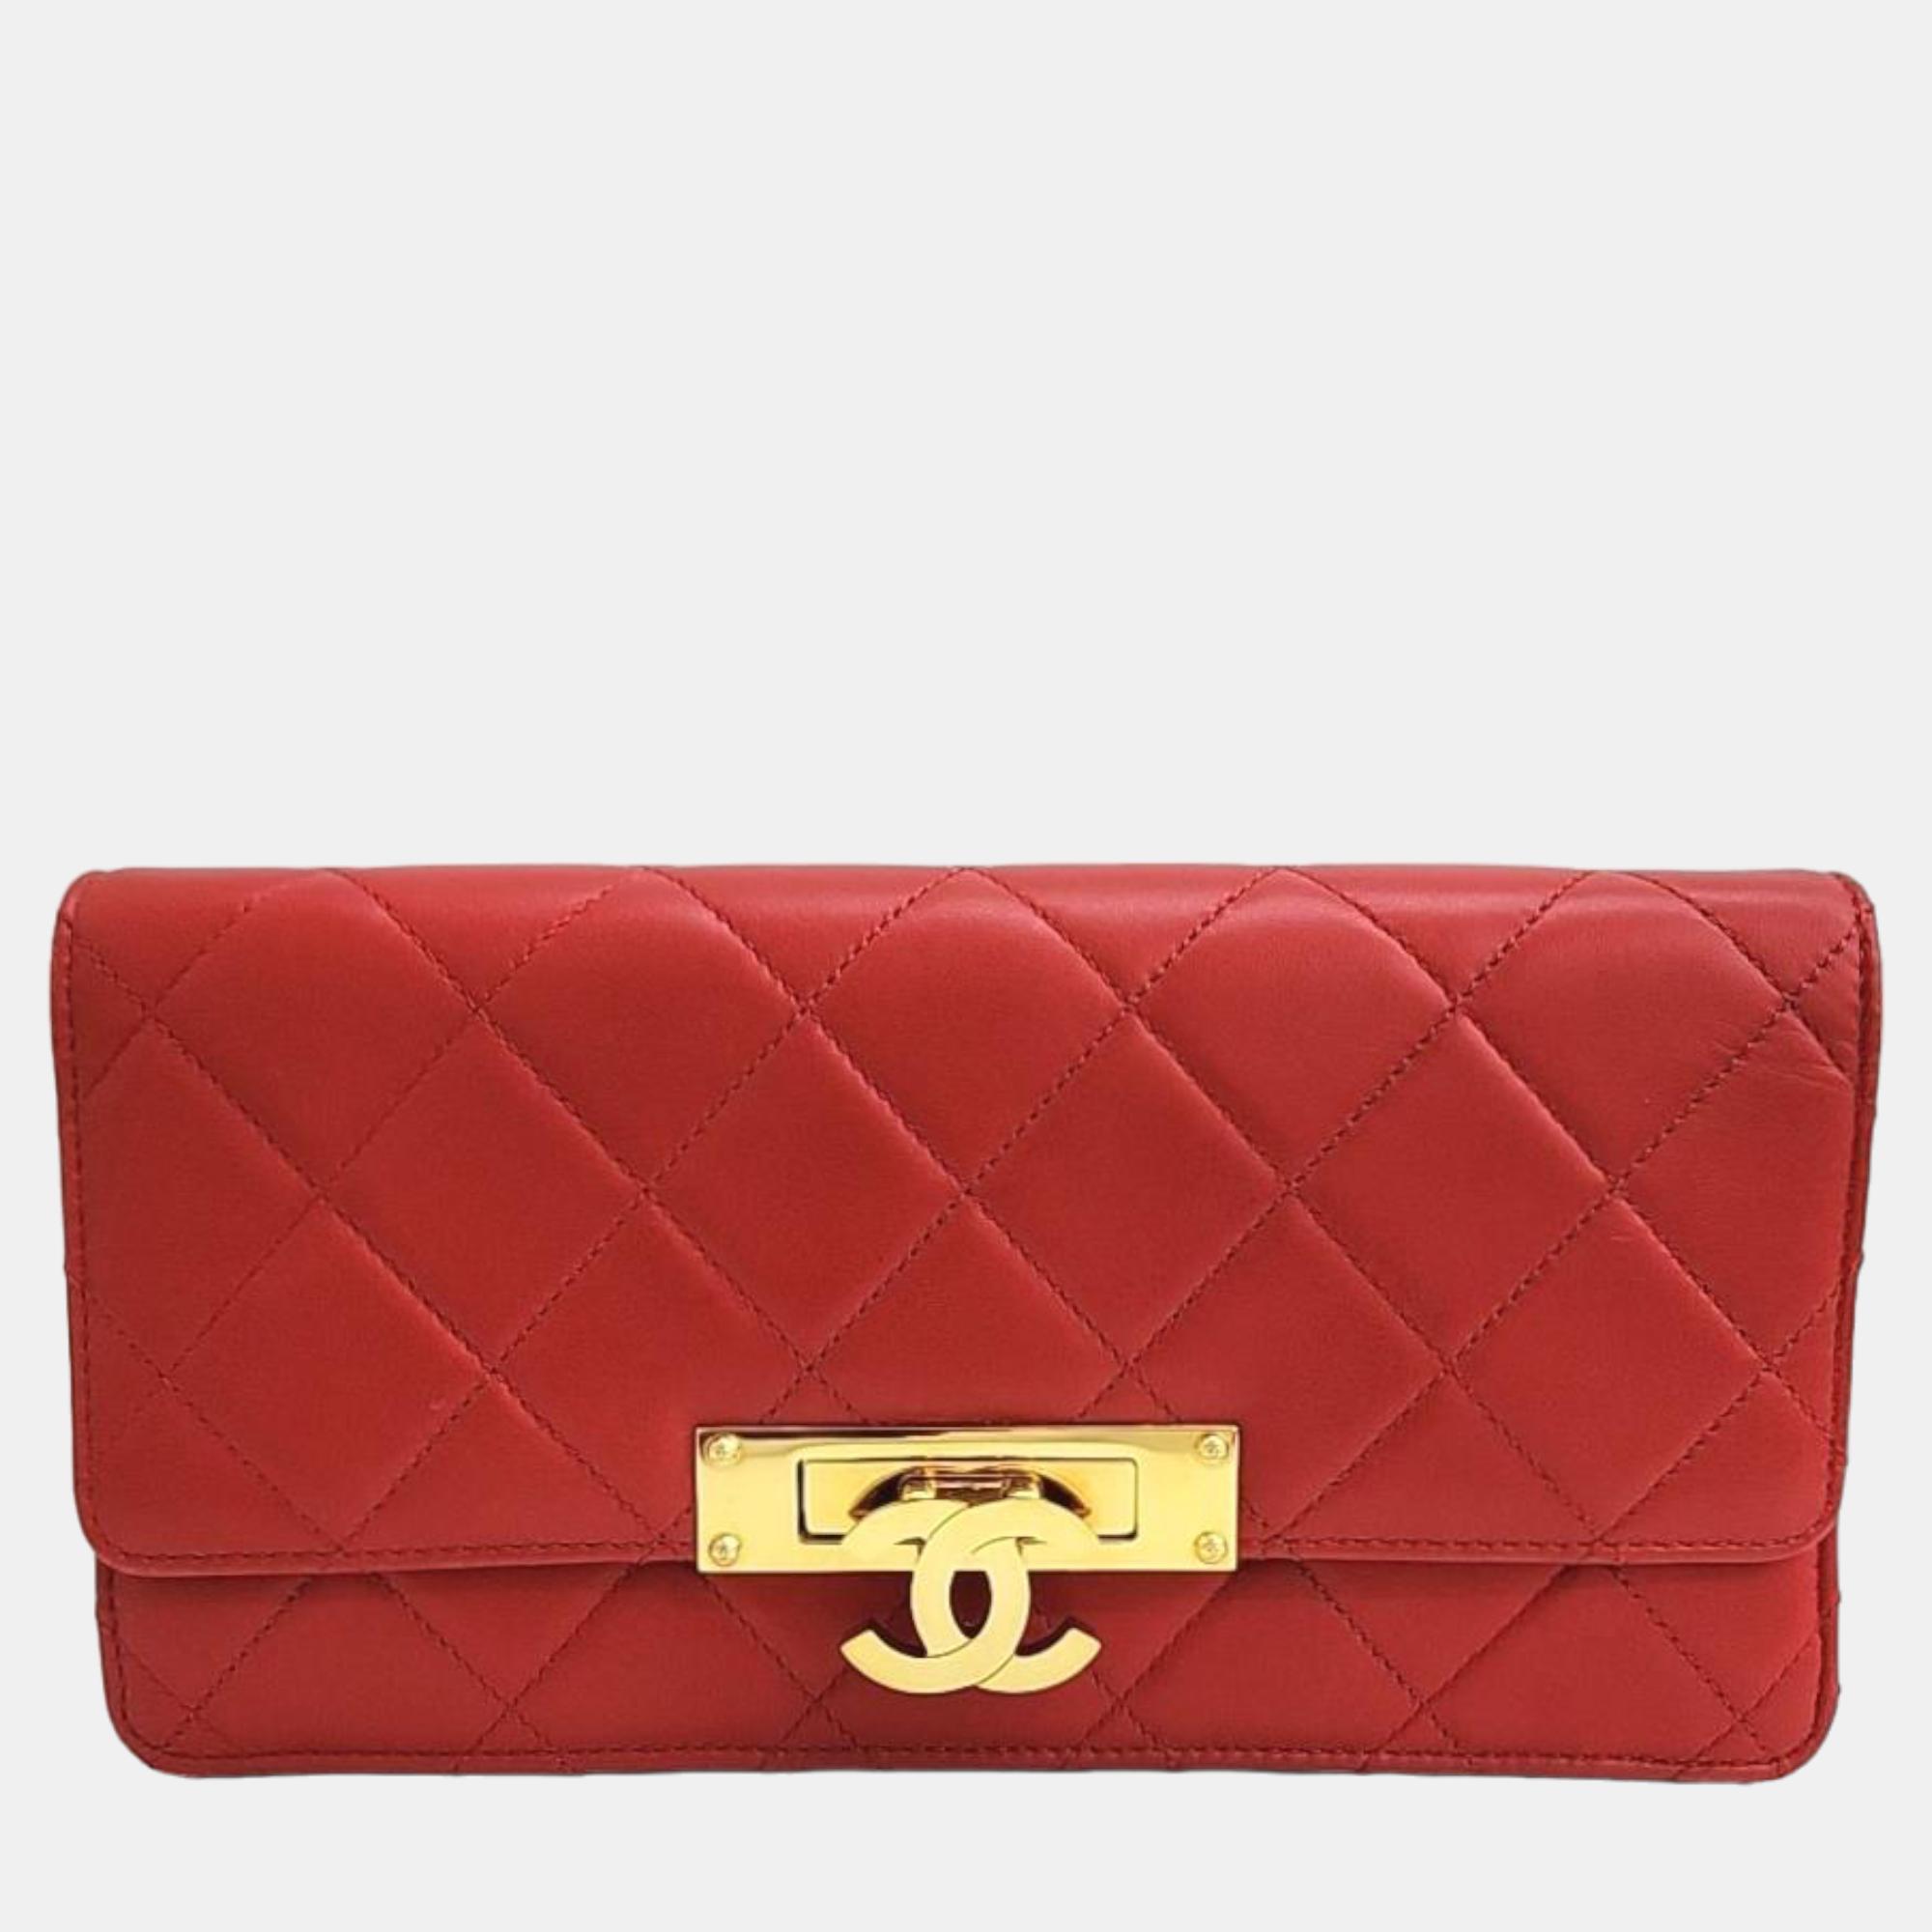 Chanel red leather golden class wallet on chain